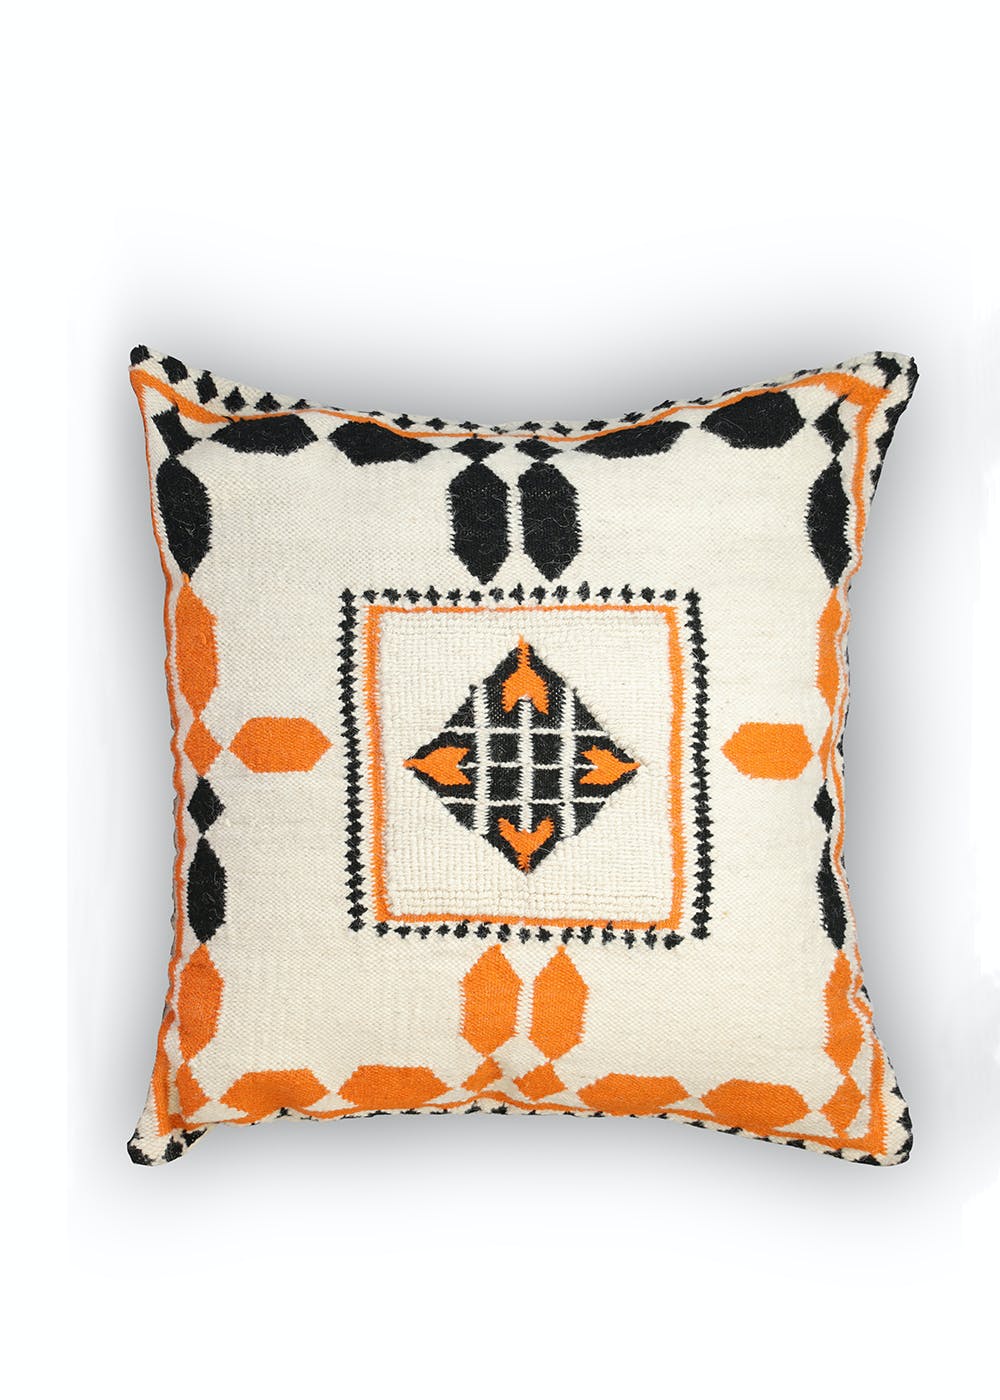 Hand Woven Embroidered Cotton Wool Amber Floor Cushion - 30 x 30 Inches